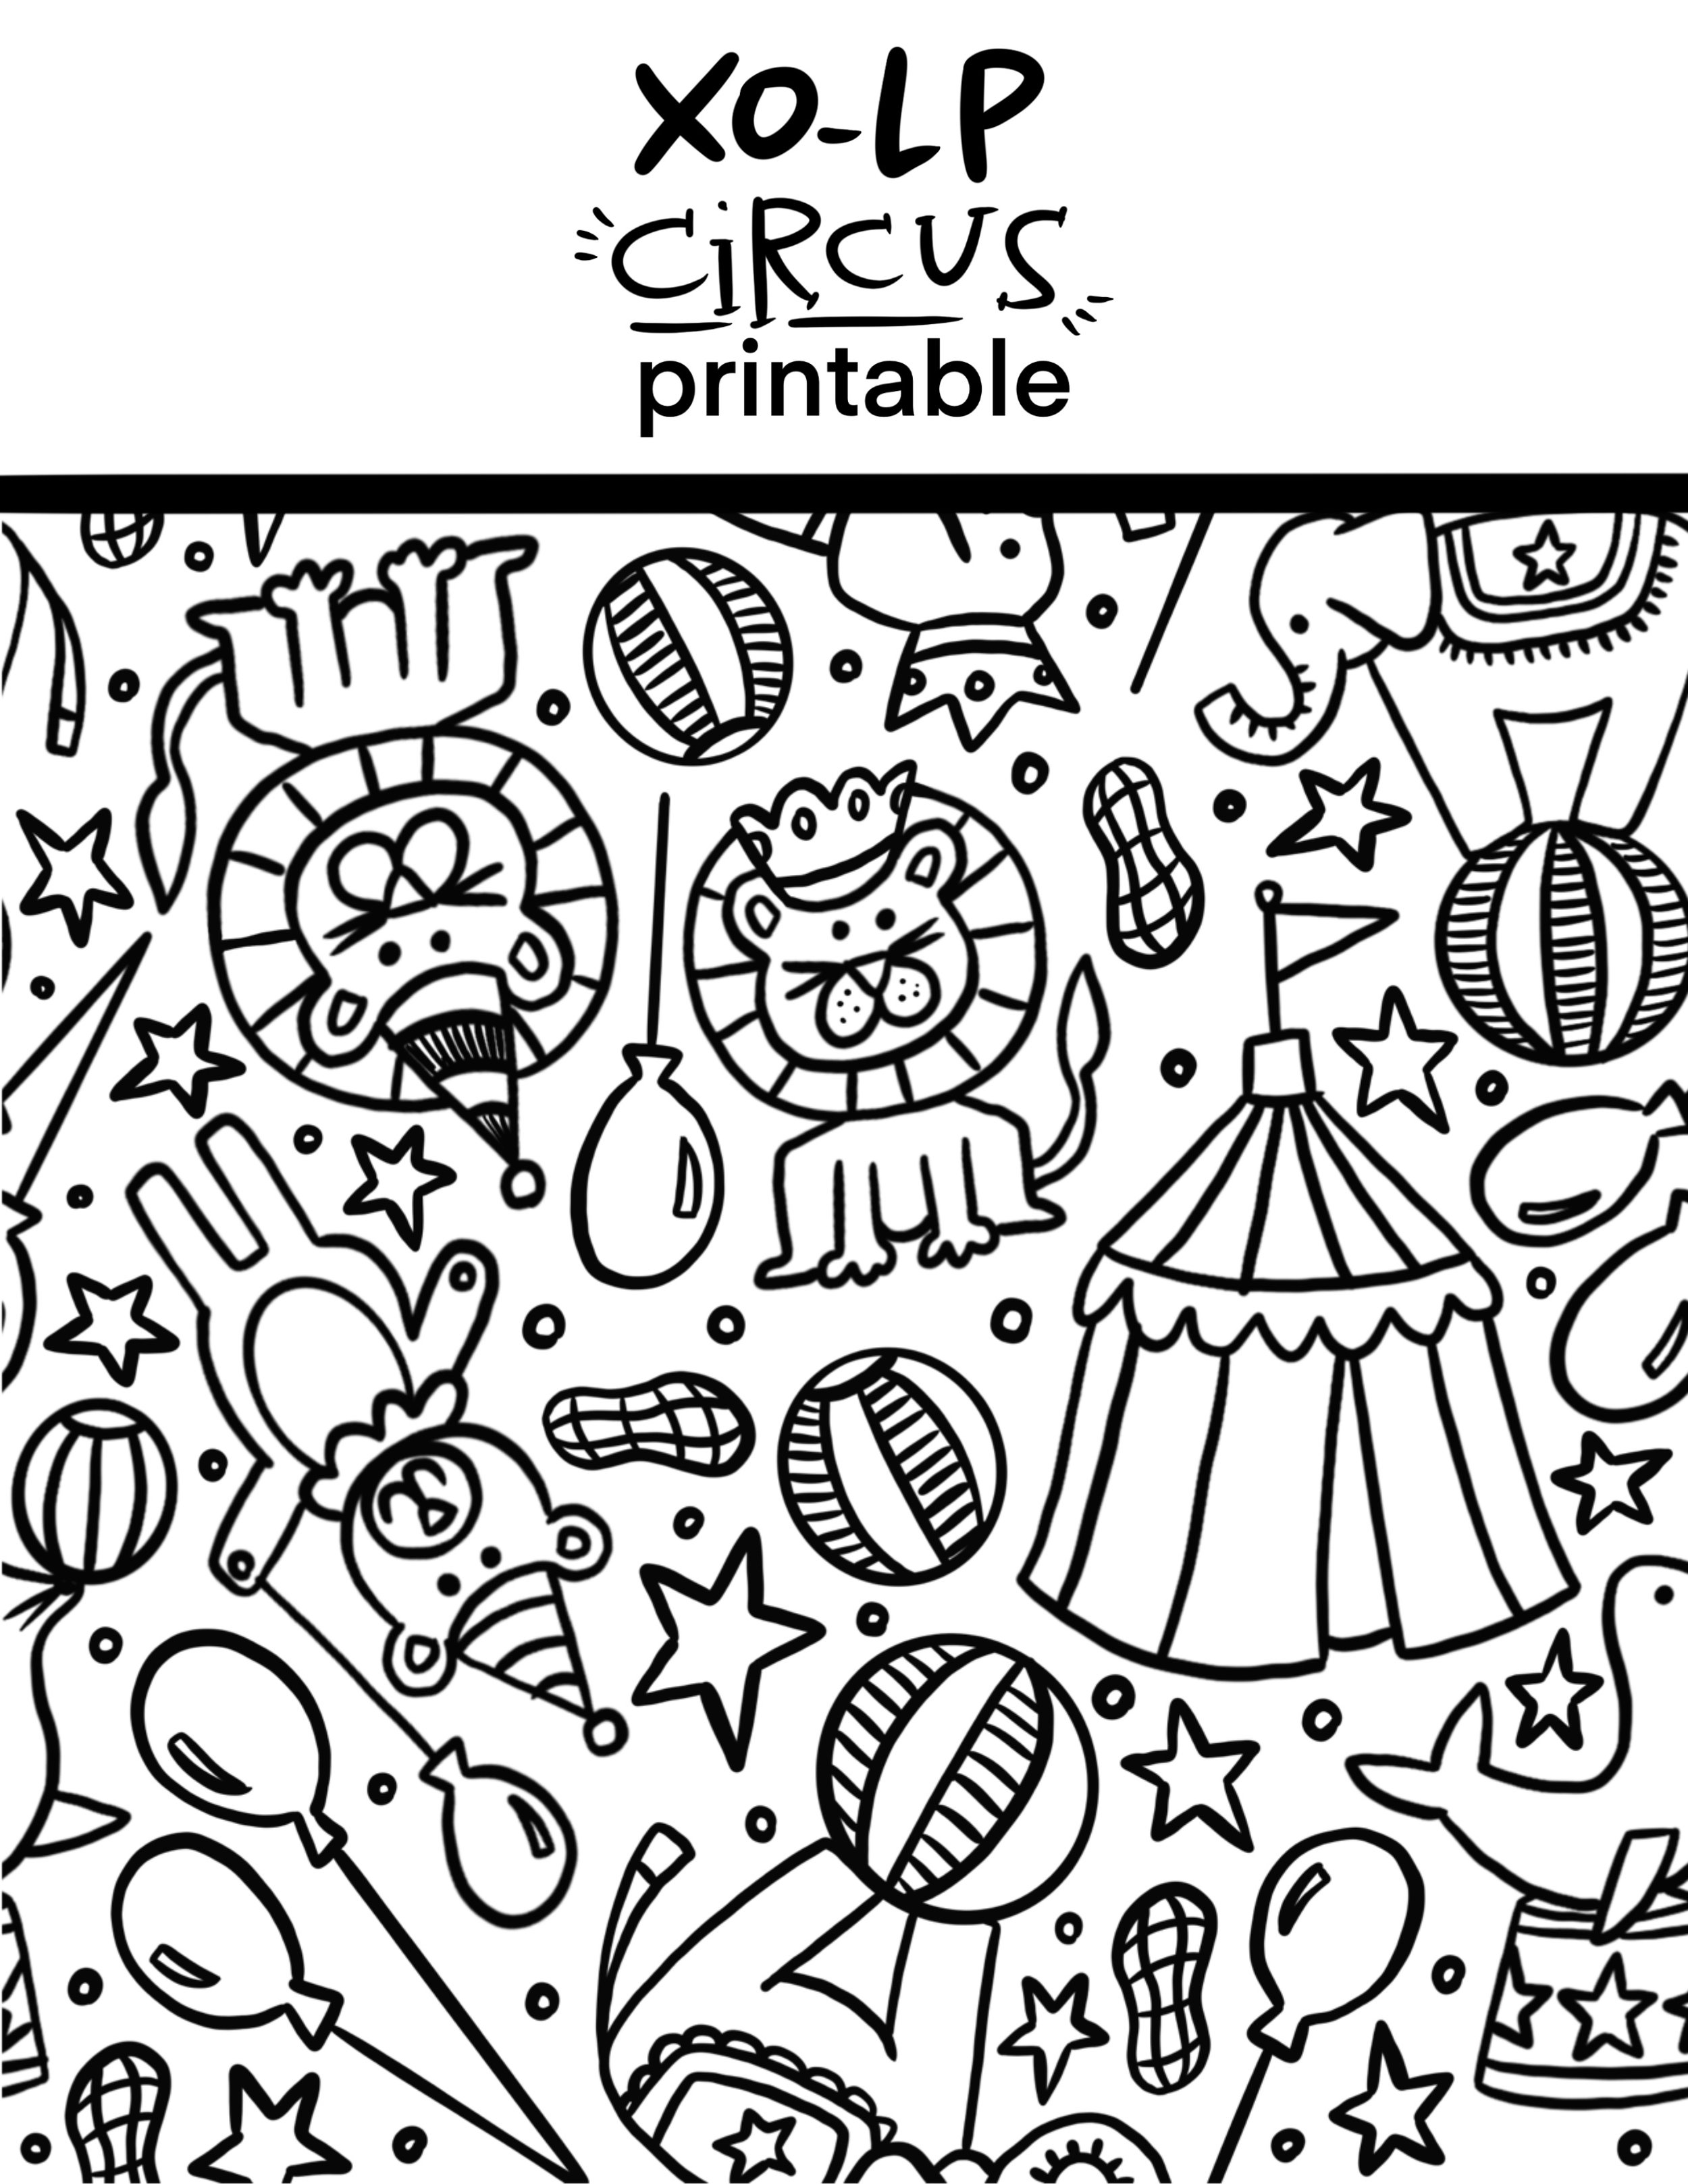 Printable Circus Coloring Book Pages — XO-LP